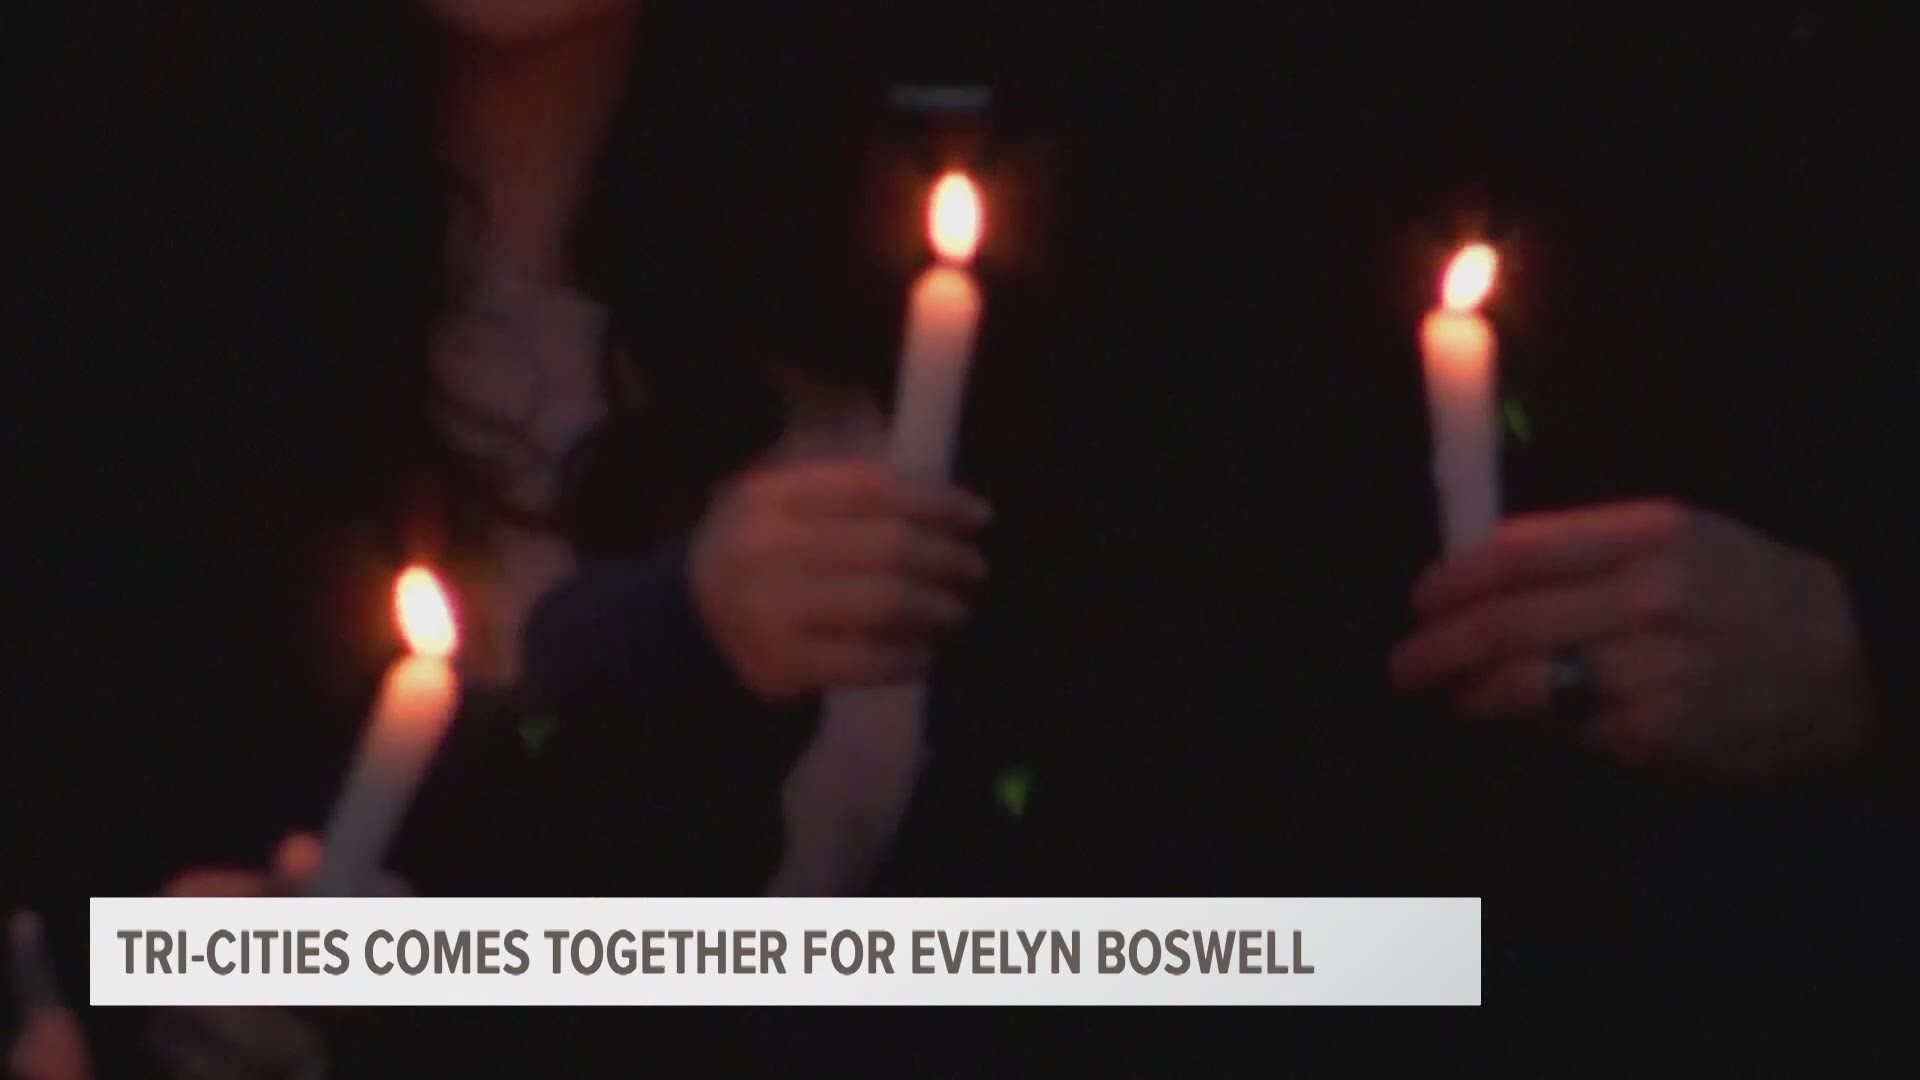 Dozens gathered to pray for Evelyn, the missing 15-month-old from Johnson City.